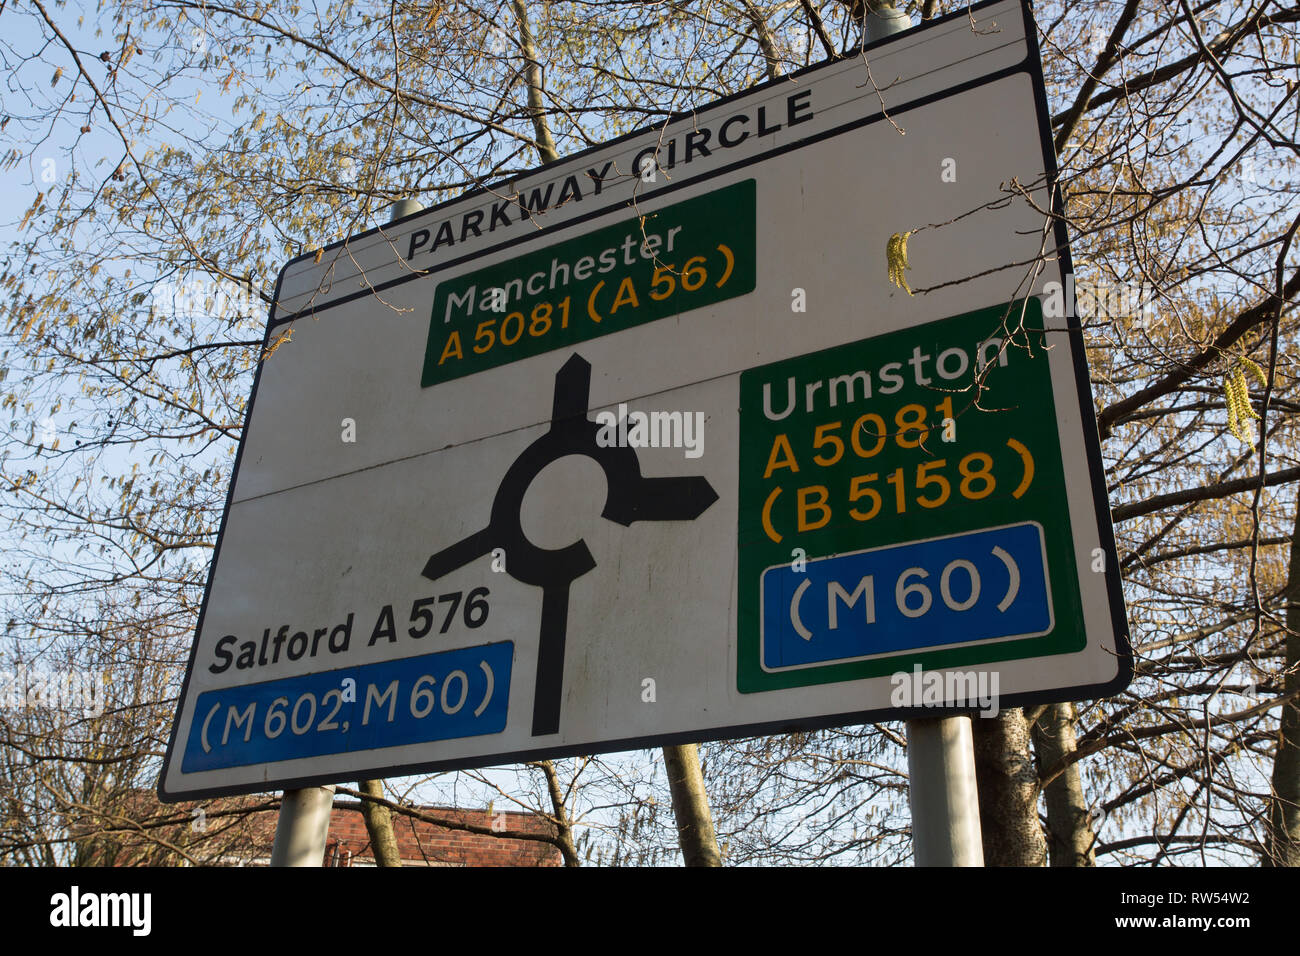 Road sign at Parkway Cercle, Trafford Park, Grand Manchester Banque D'Images